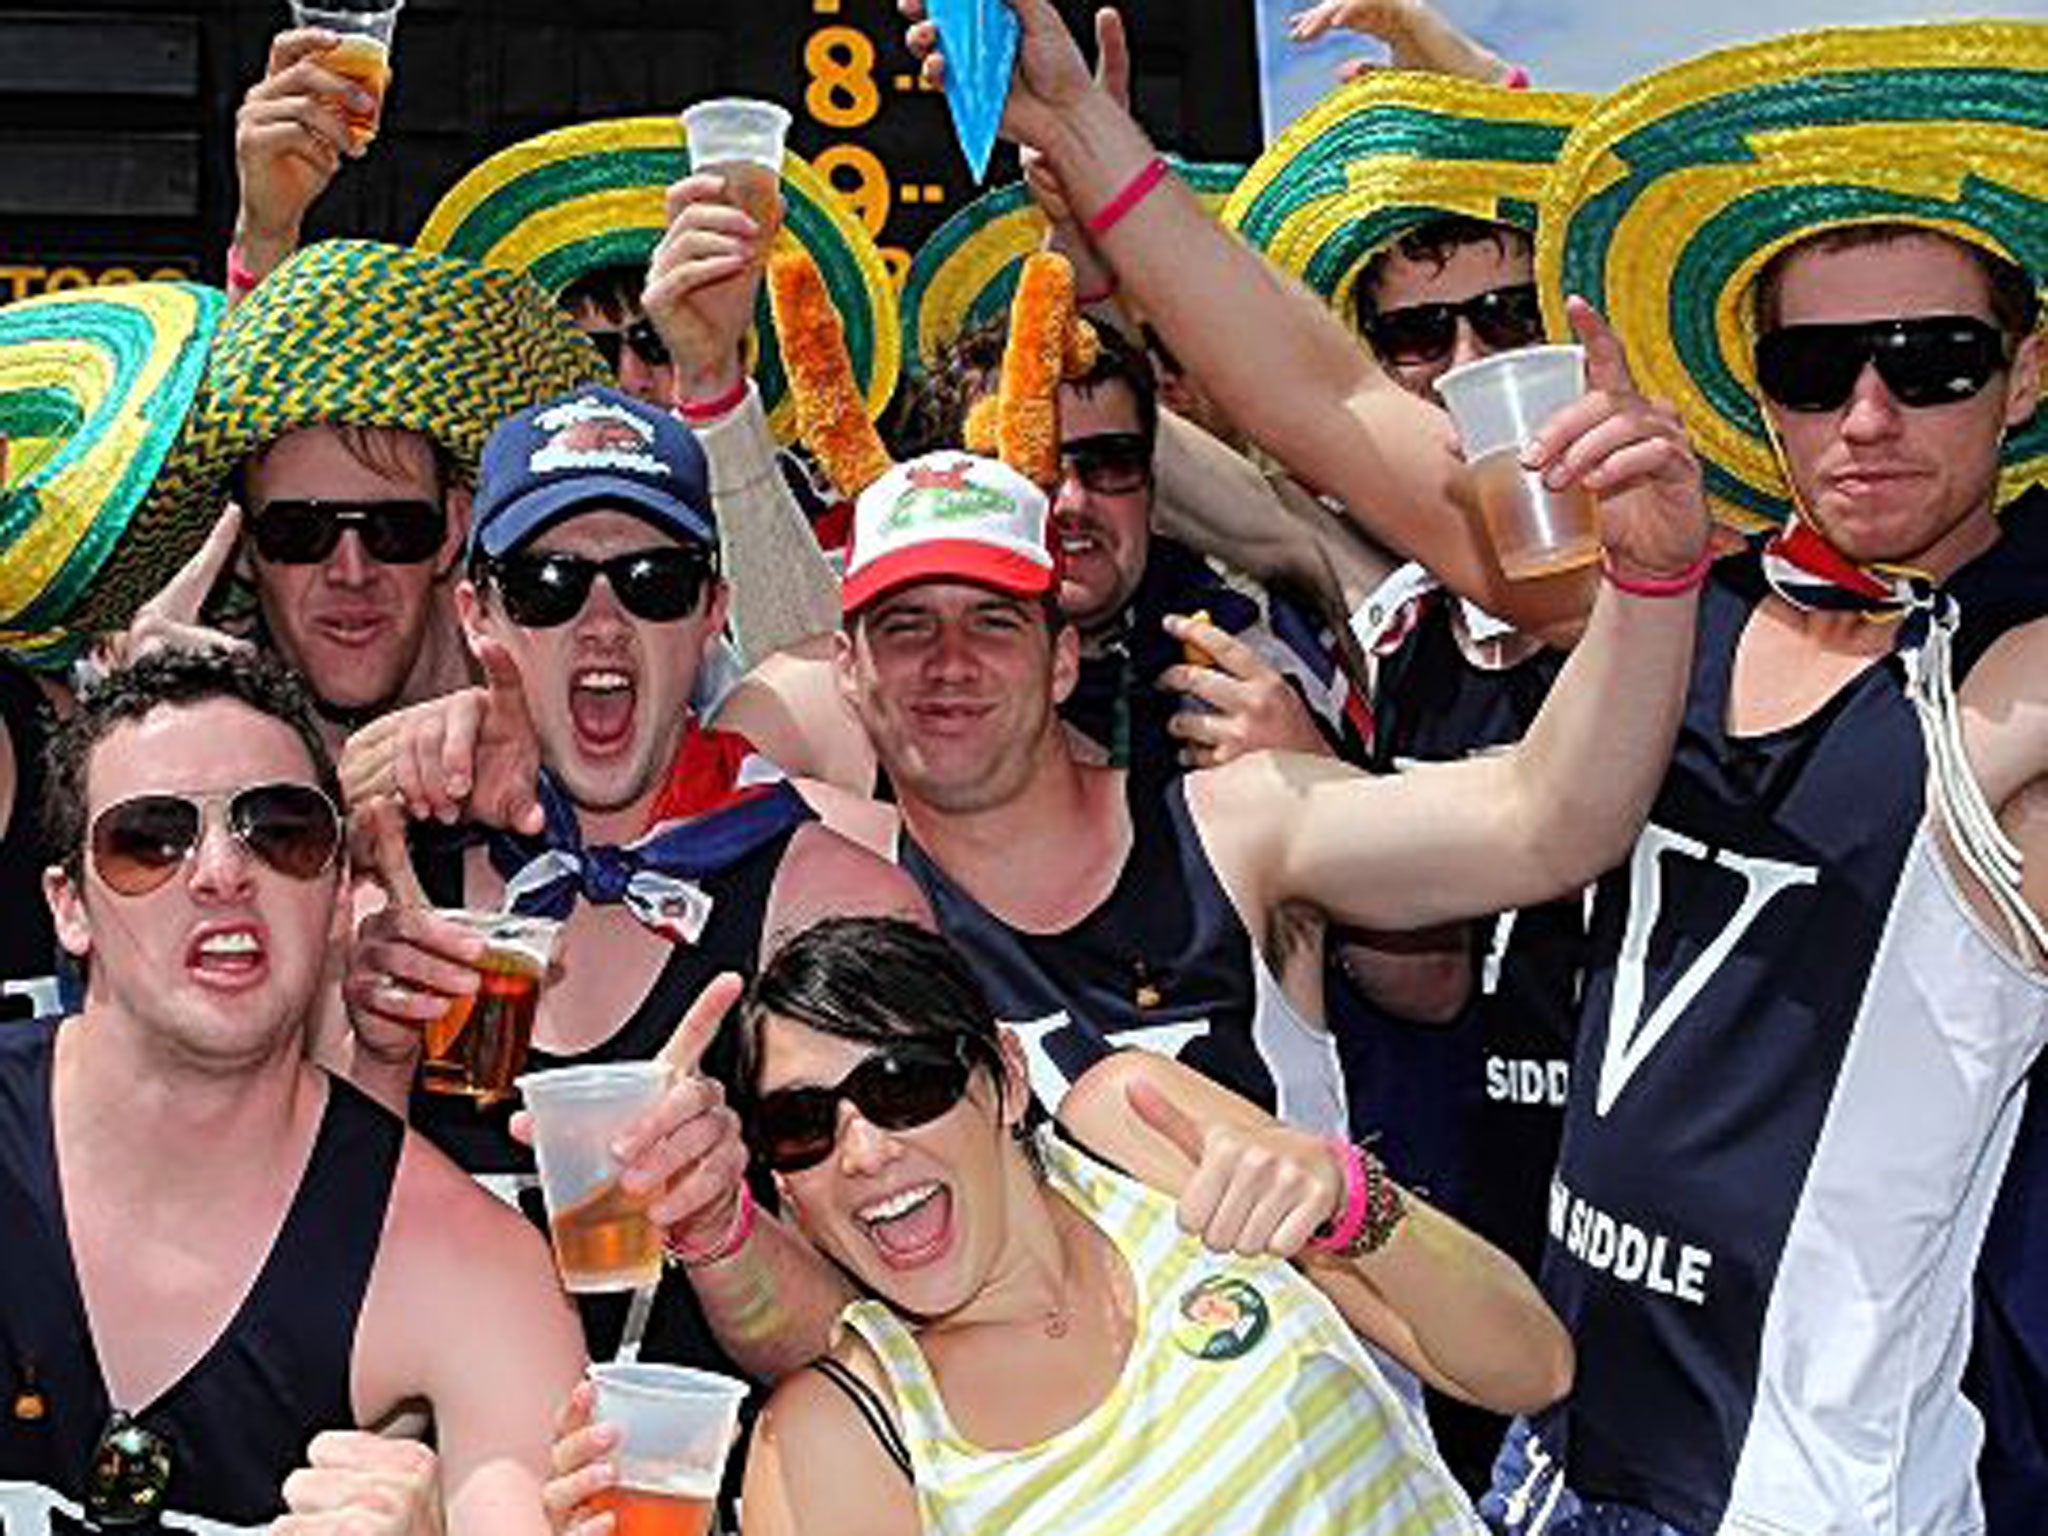 Spectators enjoy the atmosphere during the first day of the second Ashes Test